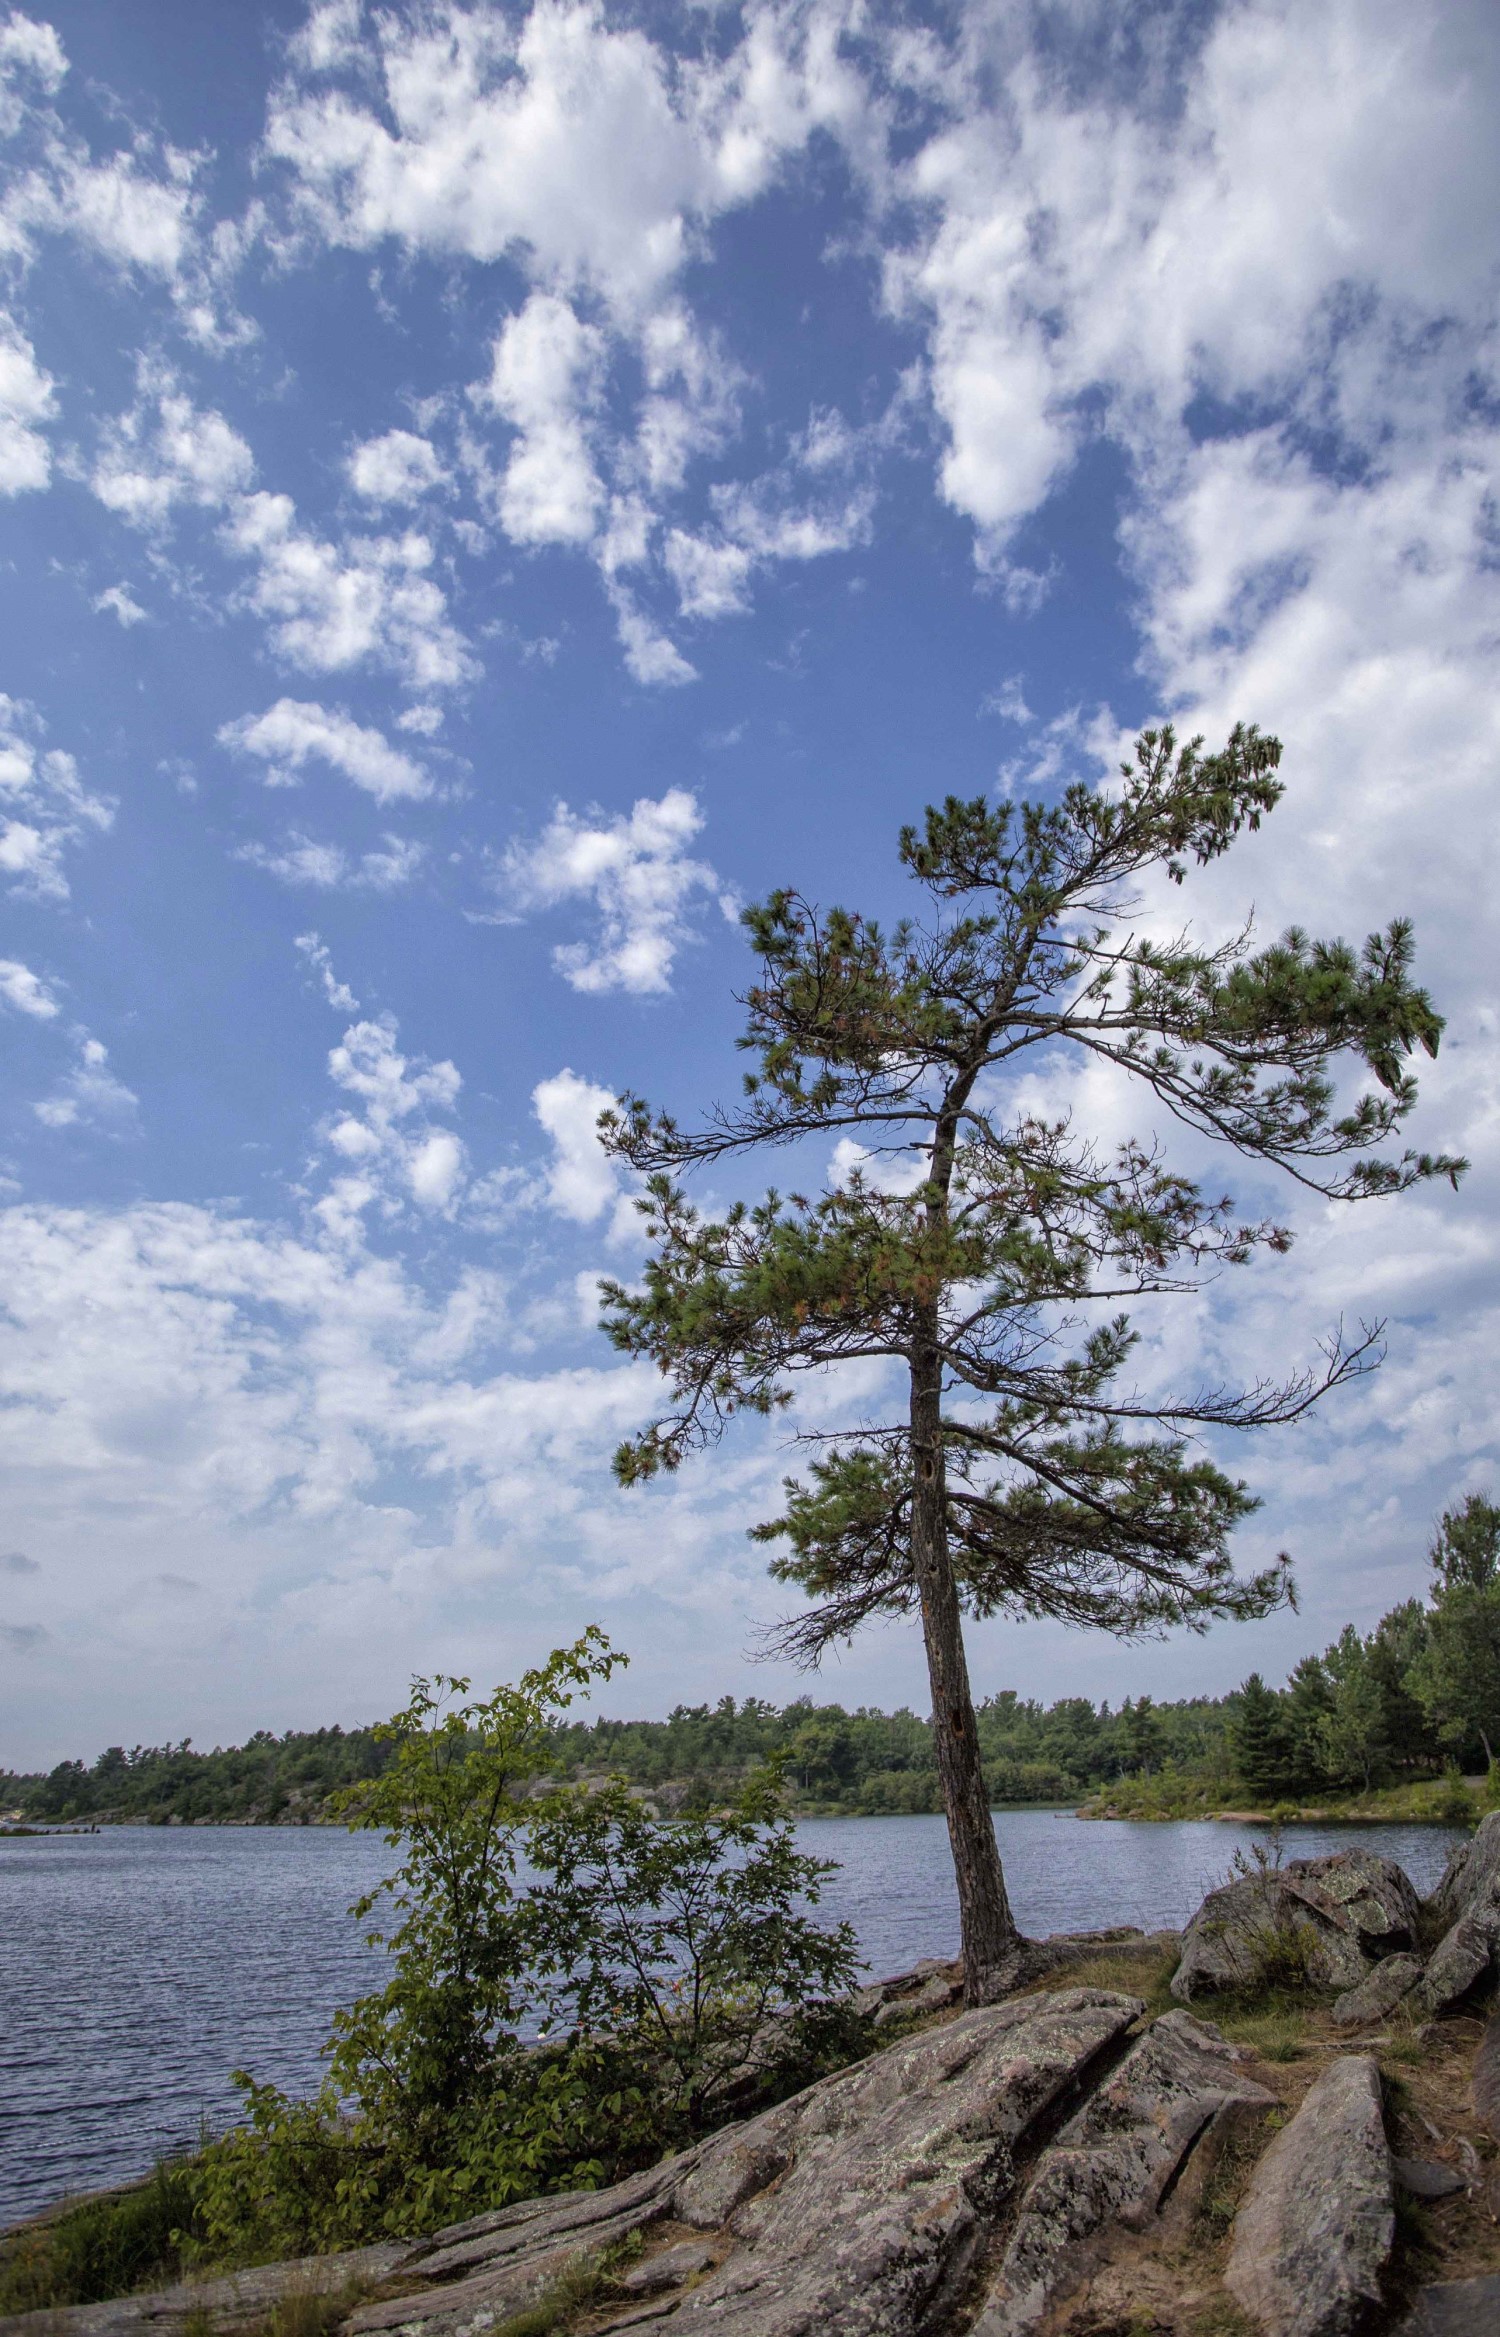 An evergreen tree growing out of bedrock in front of a lake